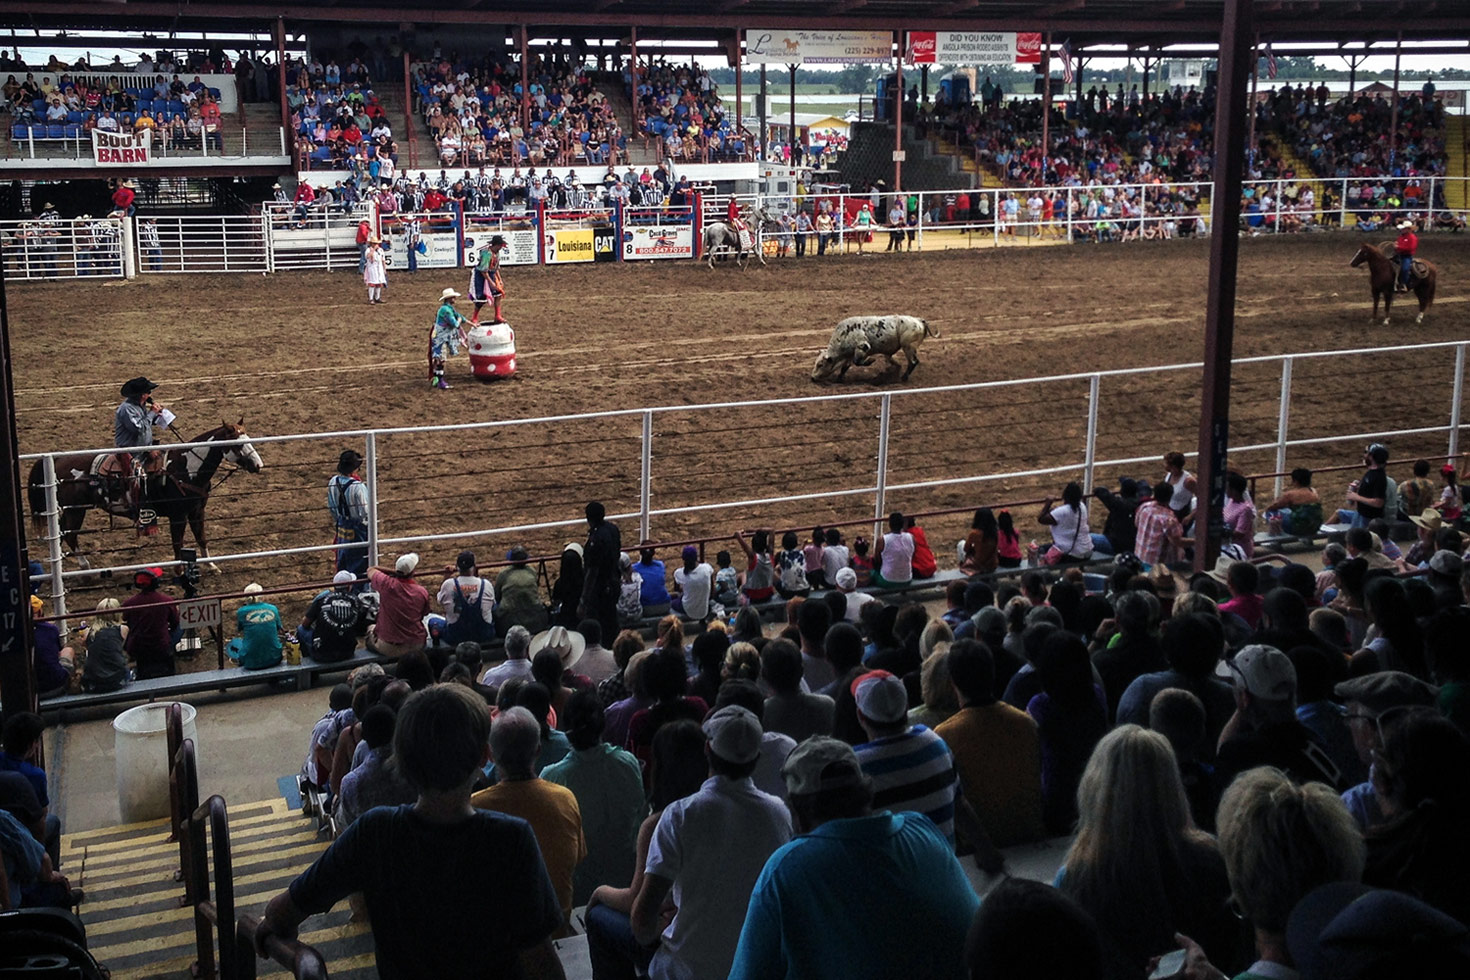 At the first rodeo, spectators sat on apple crates and the hoods of cars. The initial success led to the construction of a small arena in 1969. In the late 1990s, a trustee of the Irene and CB Pennington Foundation, Darryl Pennington, set the dream of a new, 10,000-seat multi-purpose arena in motion. The official Professional Rodeo Cowboys Association rules were adopted in 1972, and organizers contract with professional rodeo stock providers for supplies, and hire professional judges and rodeo clowns. Even with all the precautions, one inmate said that, "It gets pretty crazy out there at times."